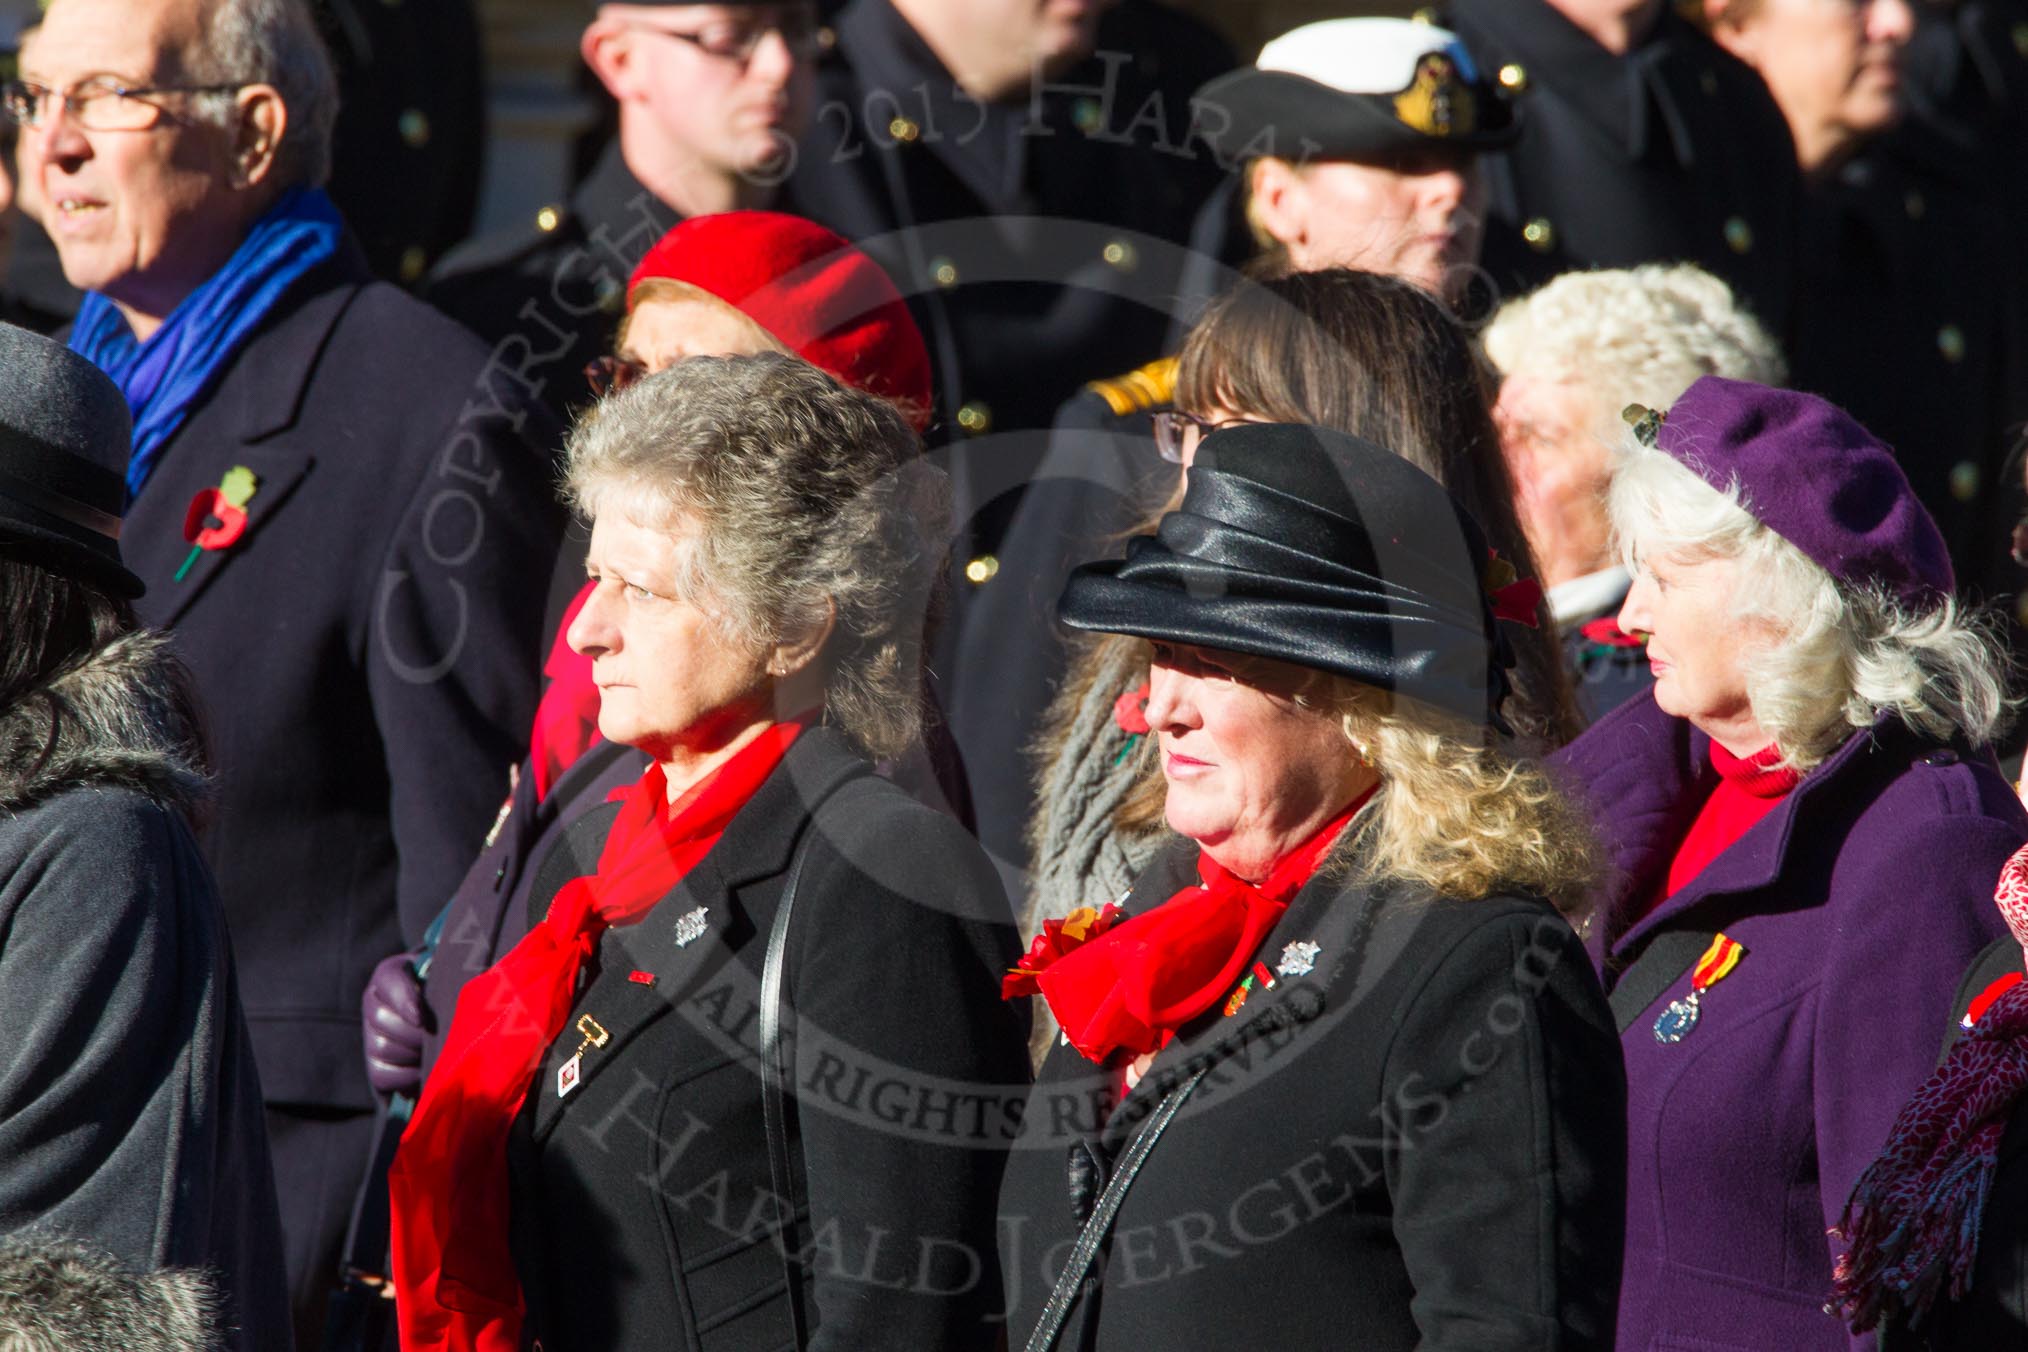 Remembrance Sunday Cenotaph March Past 2013: D1 - War Widows Association. The War Widows' Association exisits to improve the conditions of all War Widow/ers in the United Kingdom. The Association formed in 1971 following an article in a Sunday newspaper that highlighted the plight of Britain’s “forgotten women”. The Association gained charitable status in 1991 and continues to campaign against injustice..
Press stand opposite the Foreign Office building, Whitehall, London SW1,
London,
Greater London,
United Kingdom,
on 10 November 2013 at 11:38, image #25